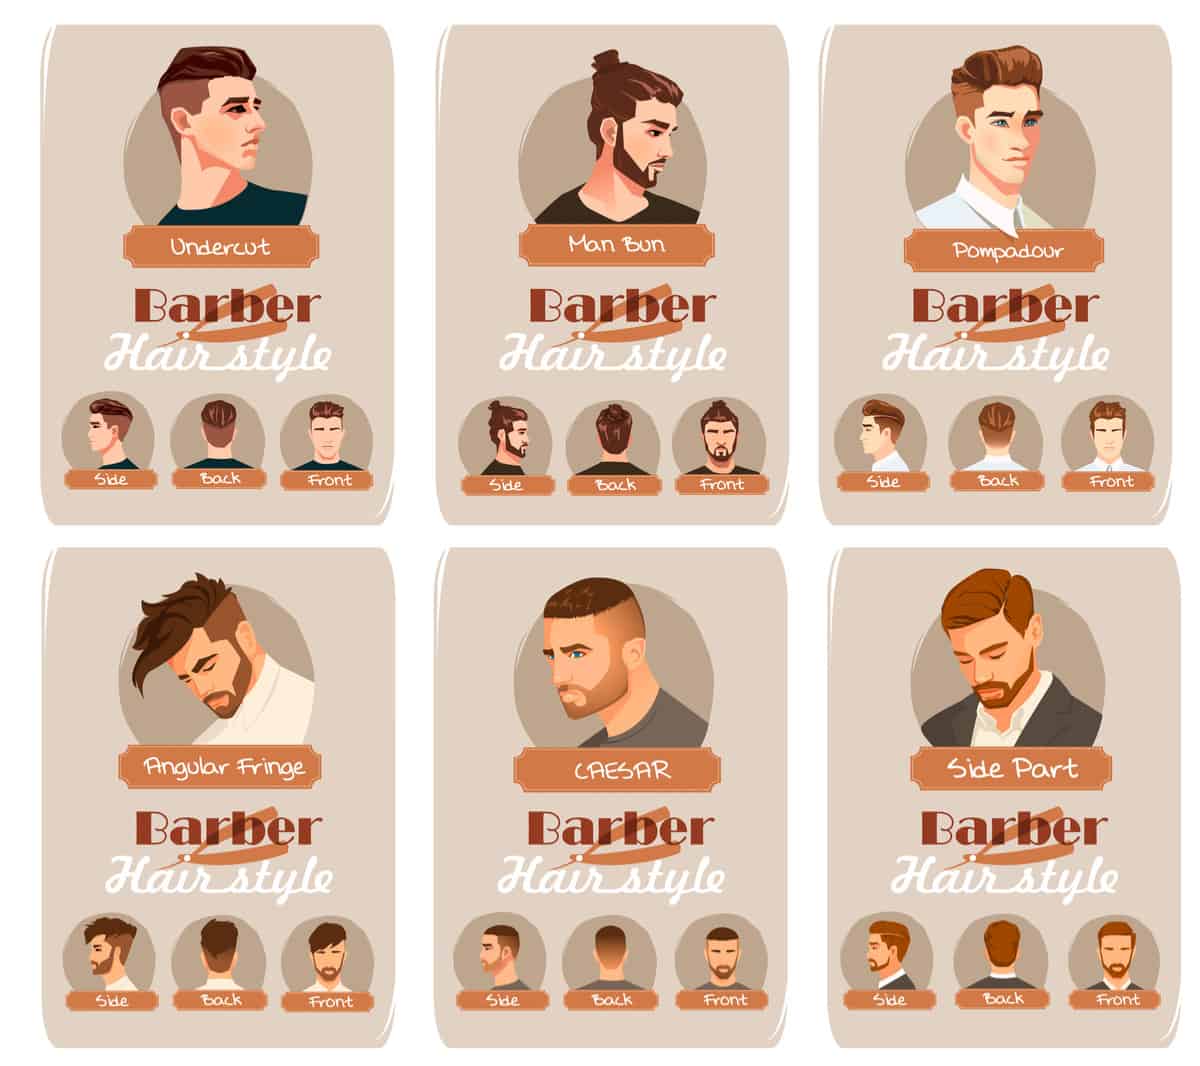 1 000 S Men S Hairstyles And Cuts For 2020